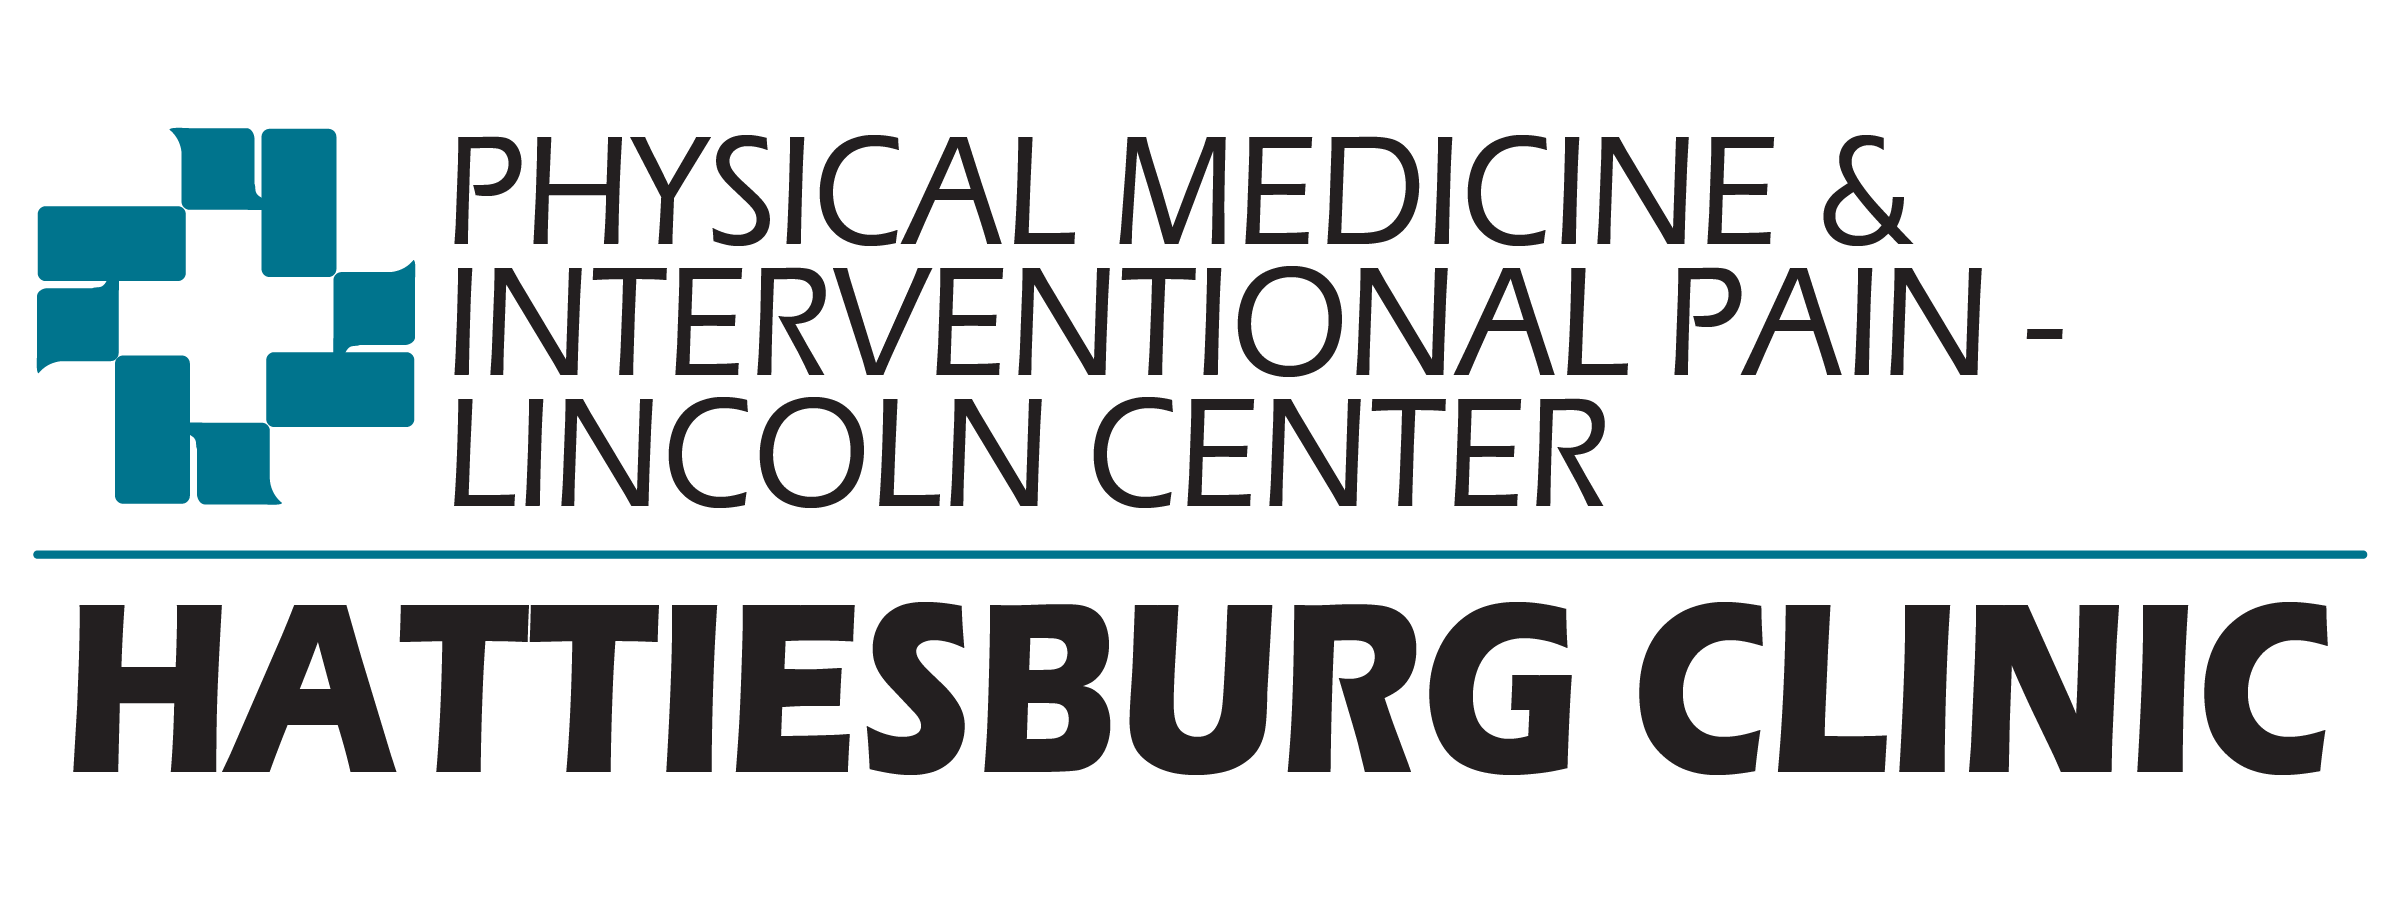 Physical Medicine & Interventional Pain - Lincoln Center logo